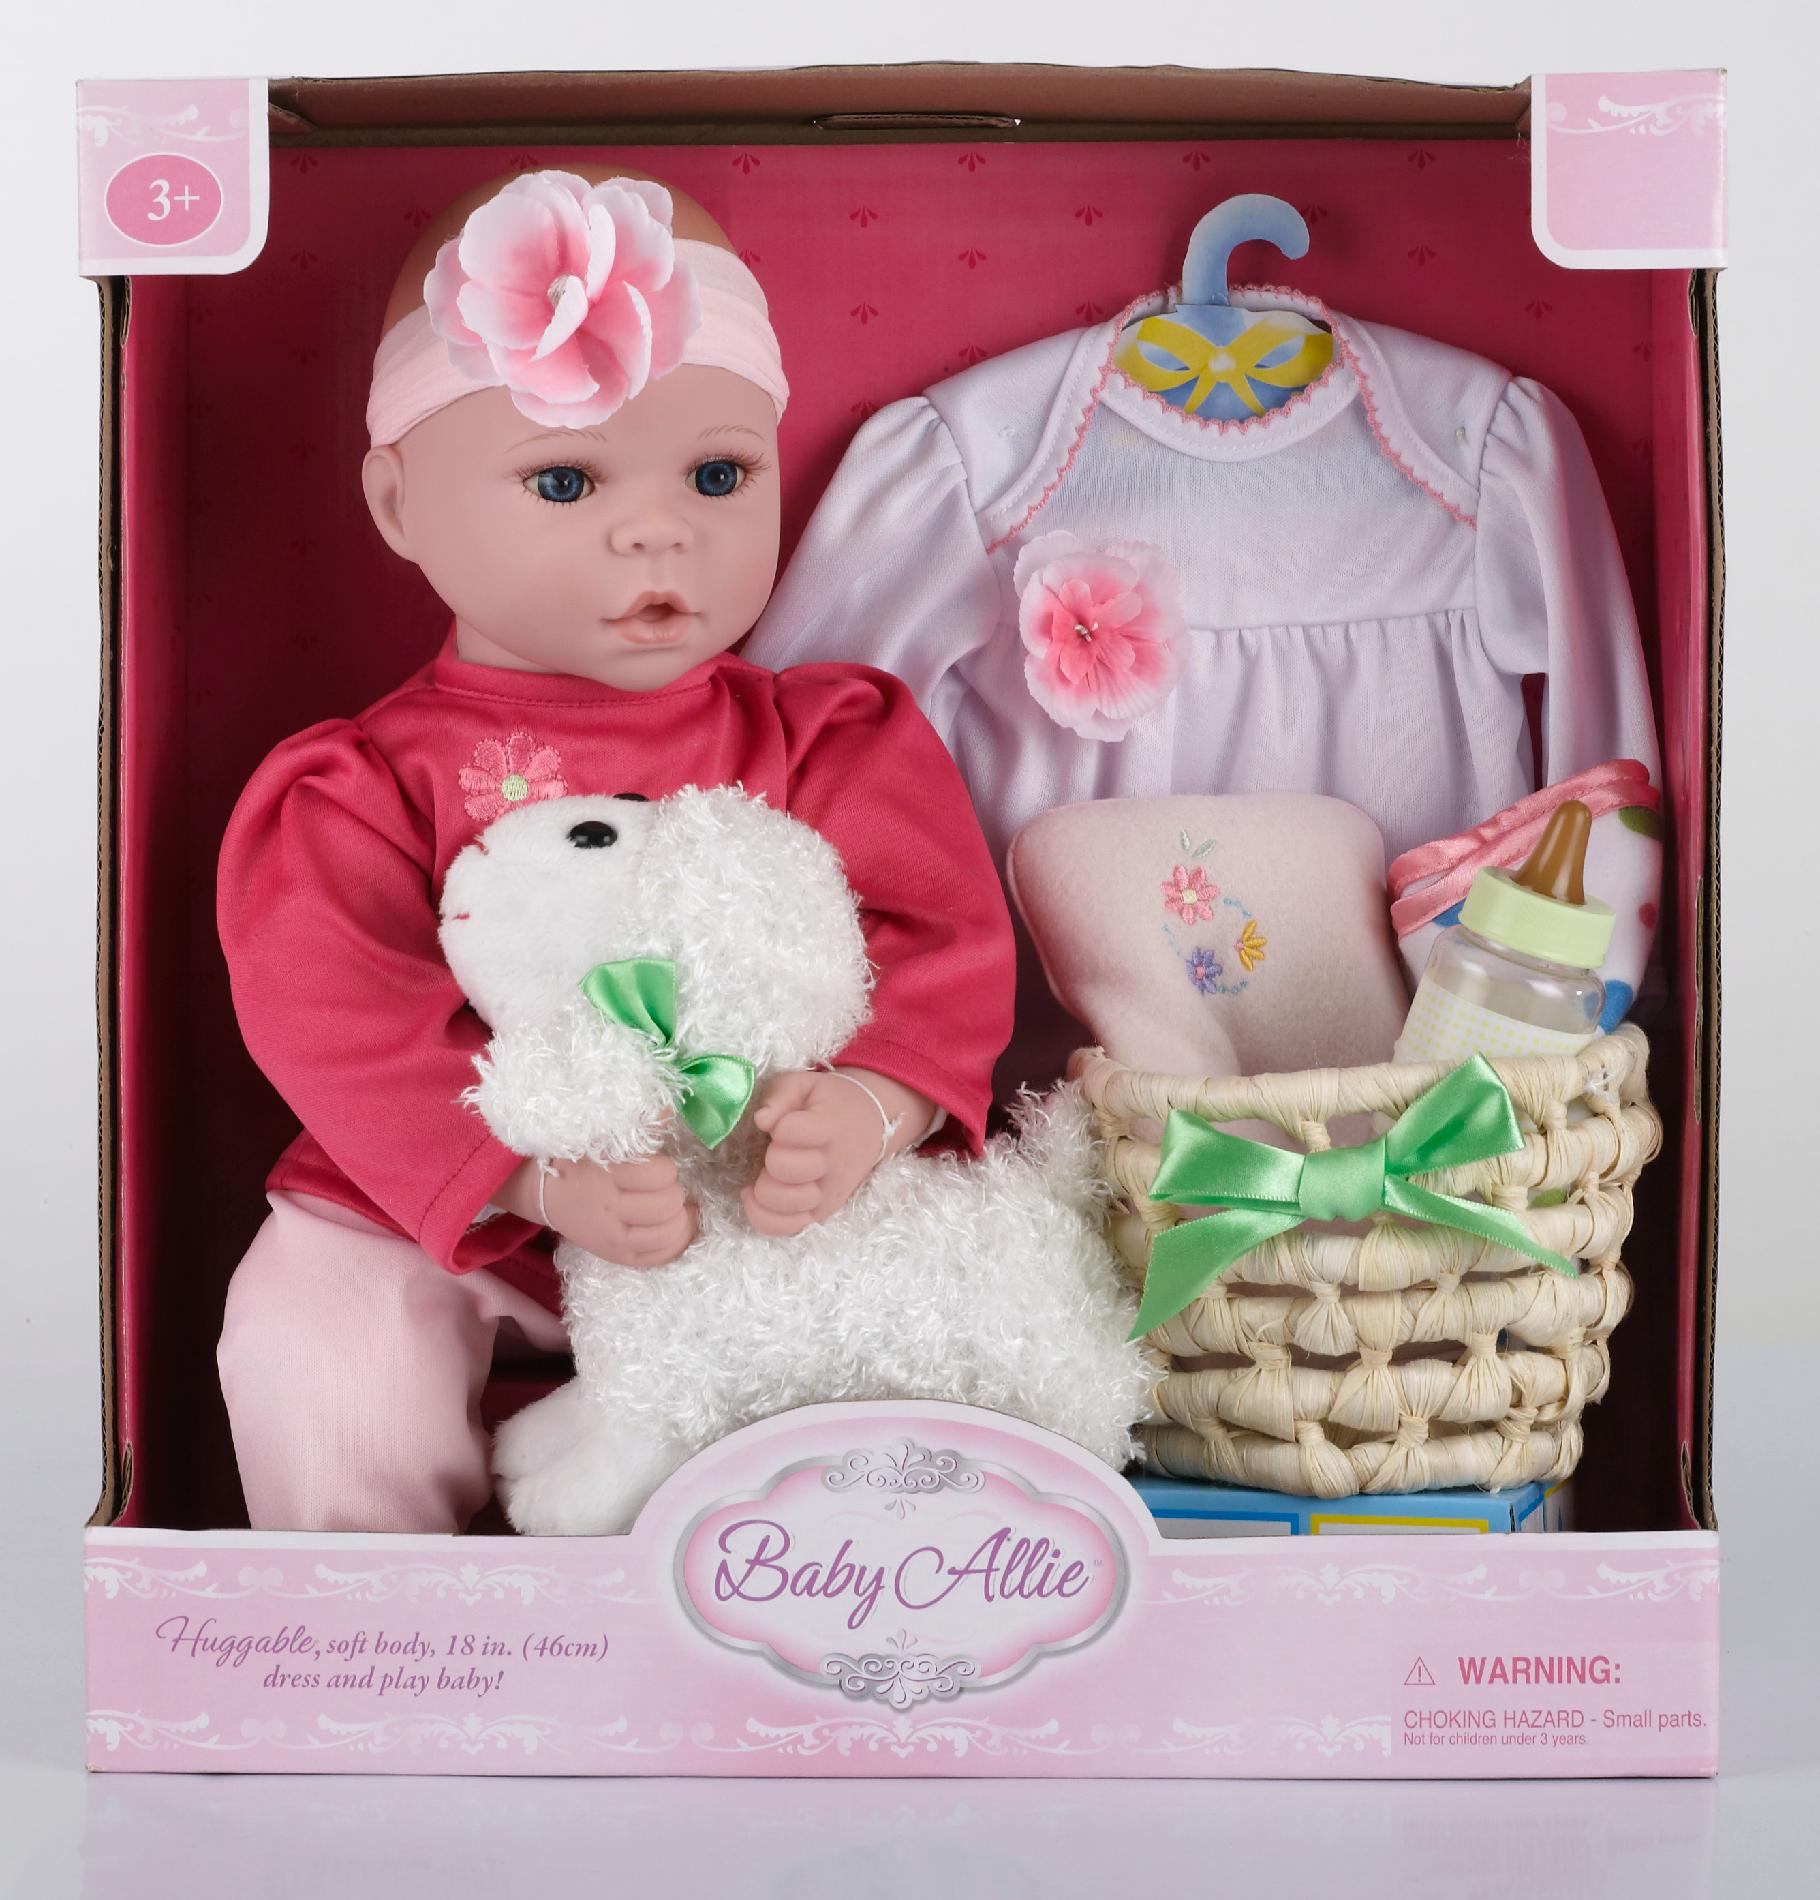 18" Baby Allie's Bye Bye Play Set with Plush Animal